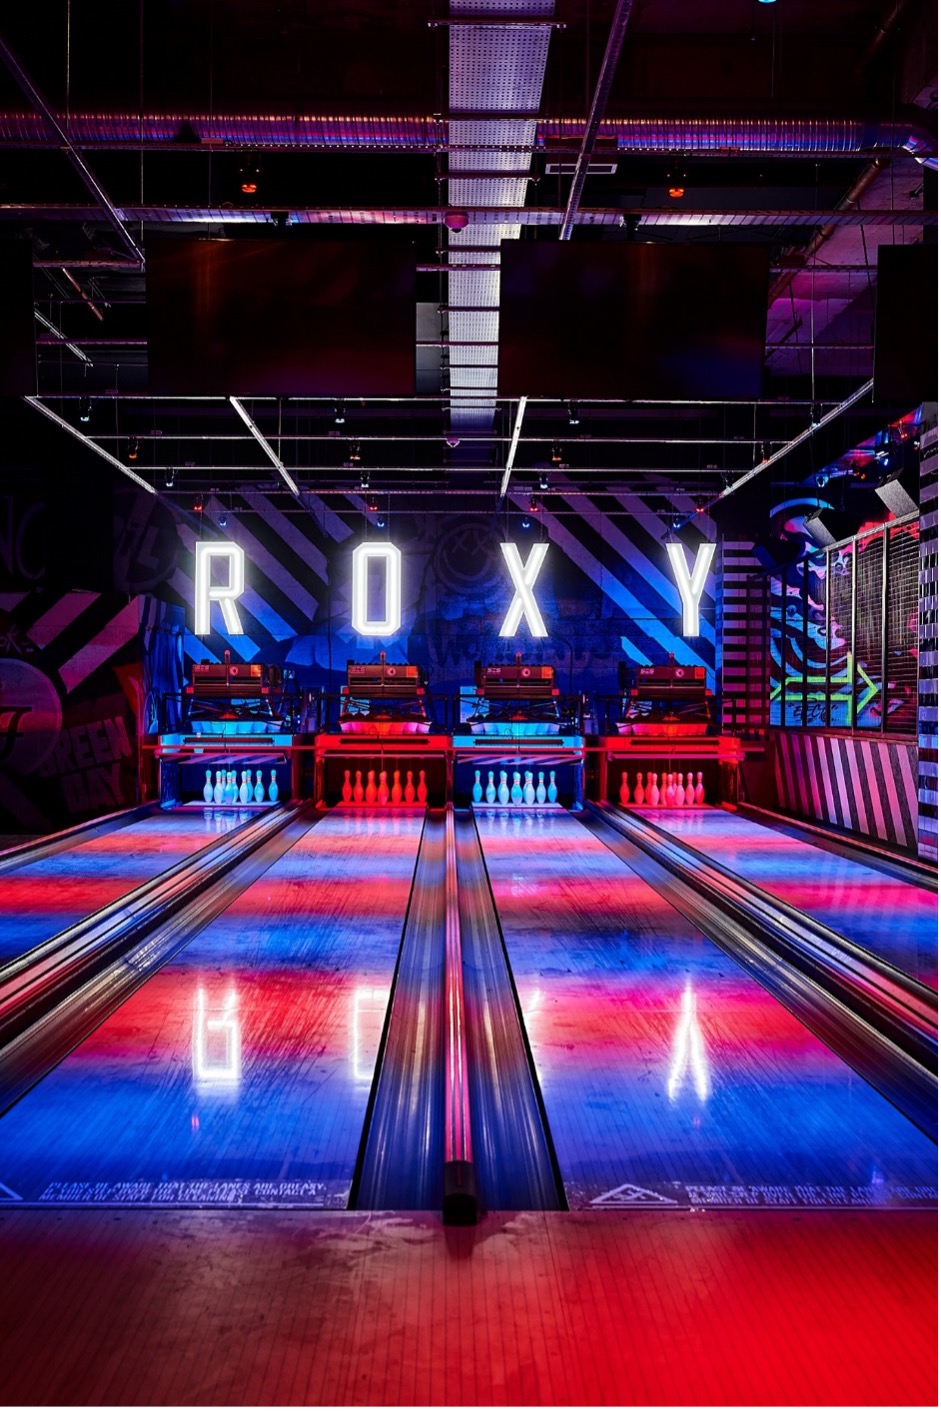 bowling alley with R O X Y letters spaced out above the wall